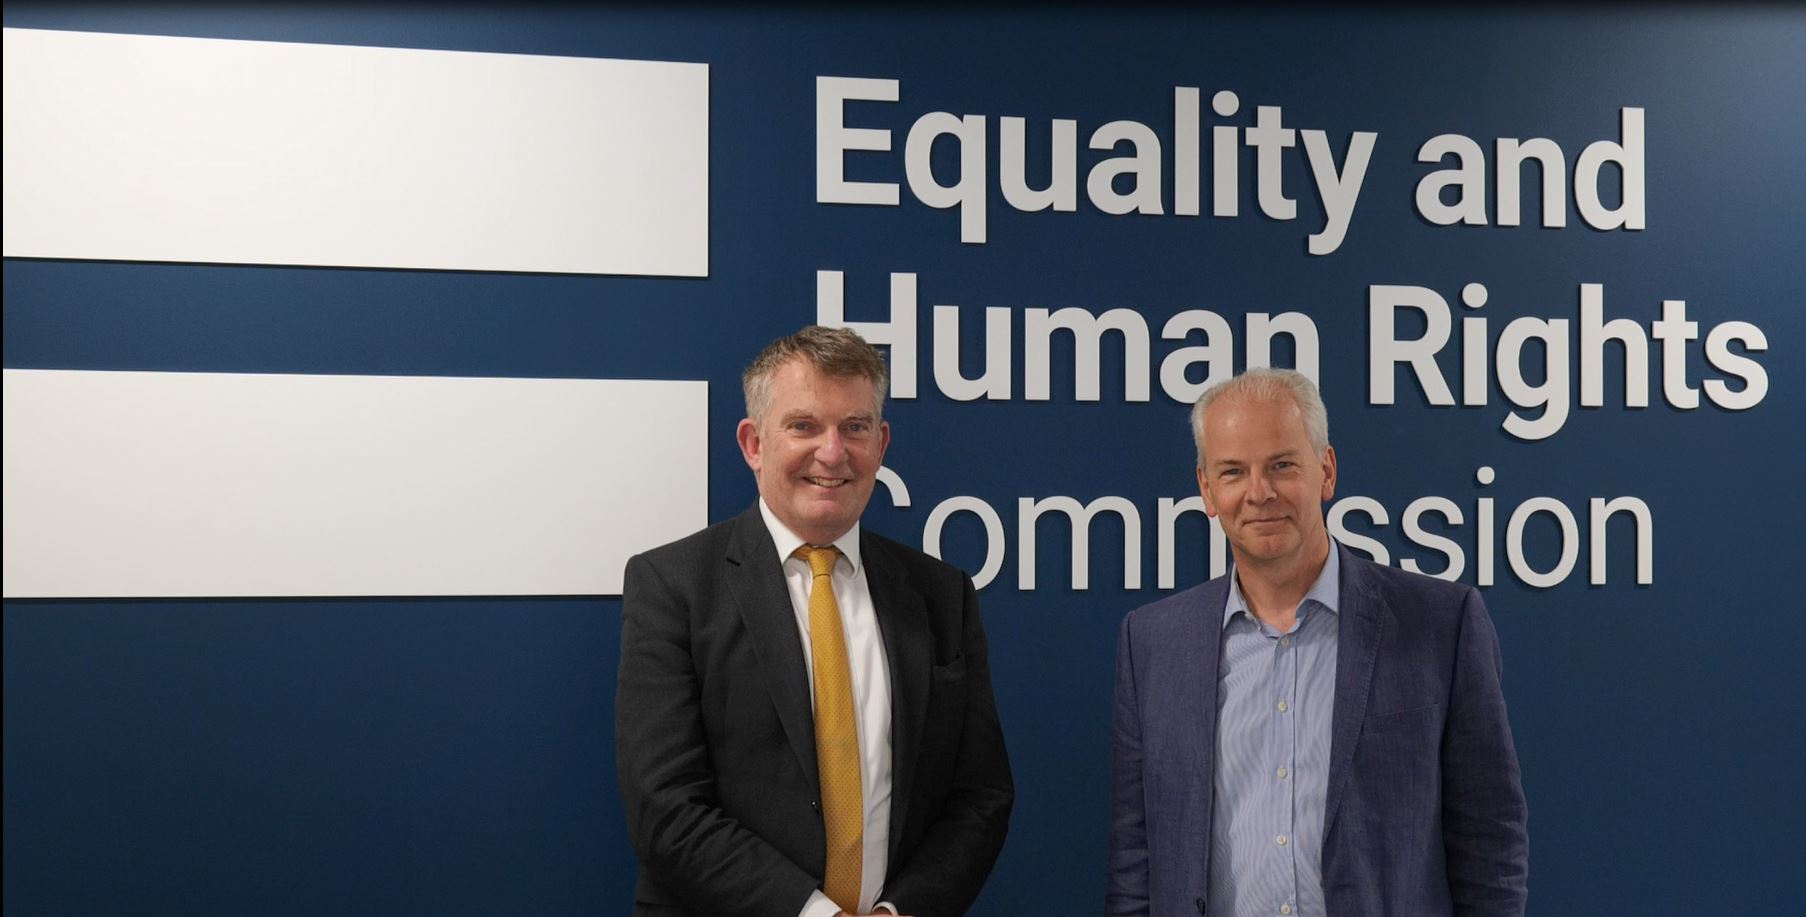 Marcial Boo and Nigel Ellis from LGSCO stand in front of a wall with the Equality and Human Rights Commission on it